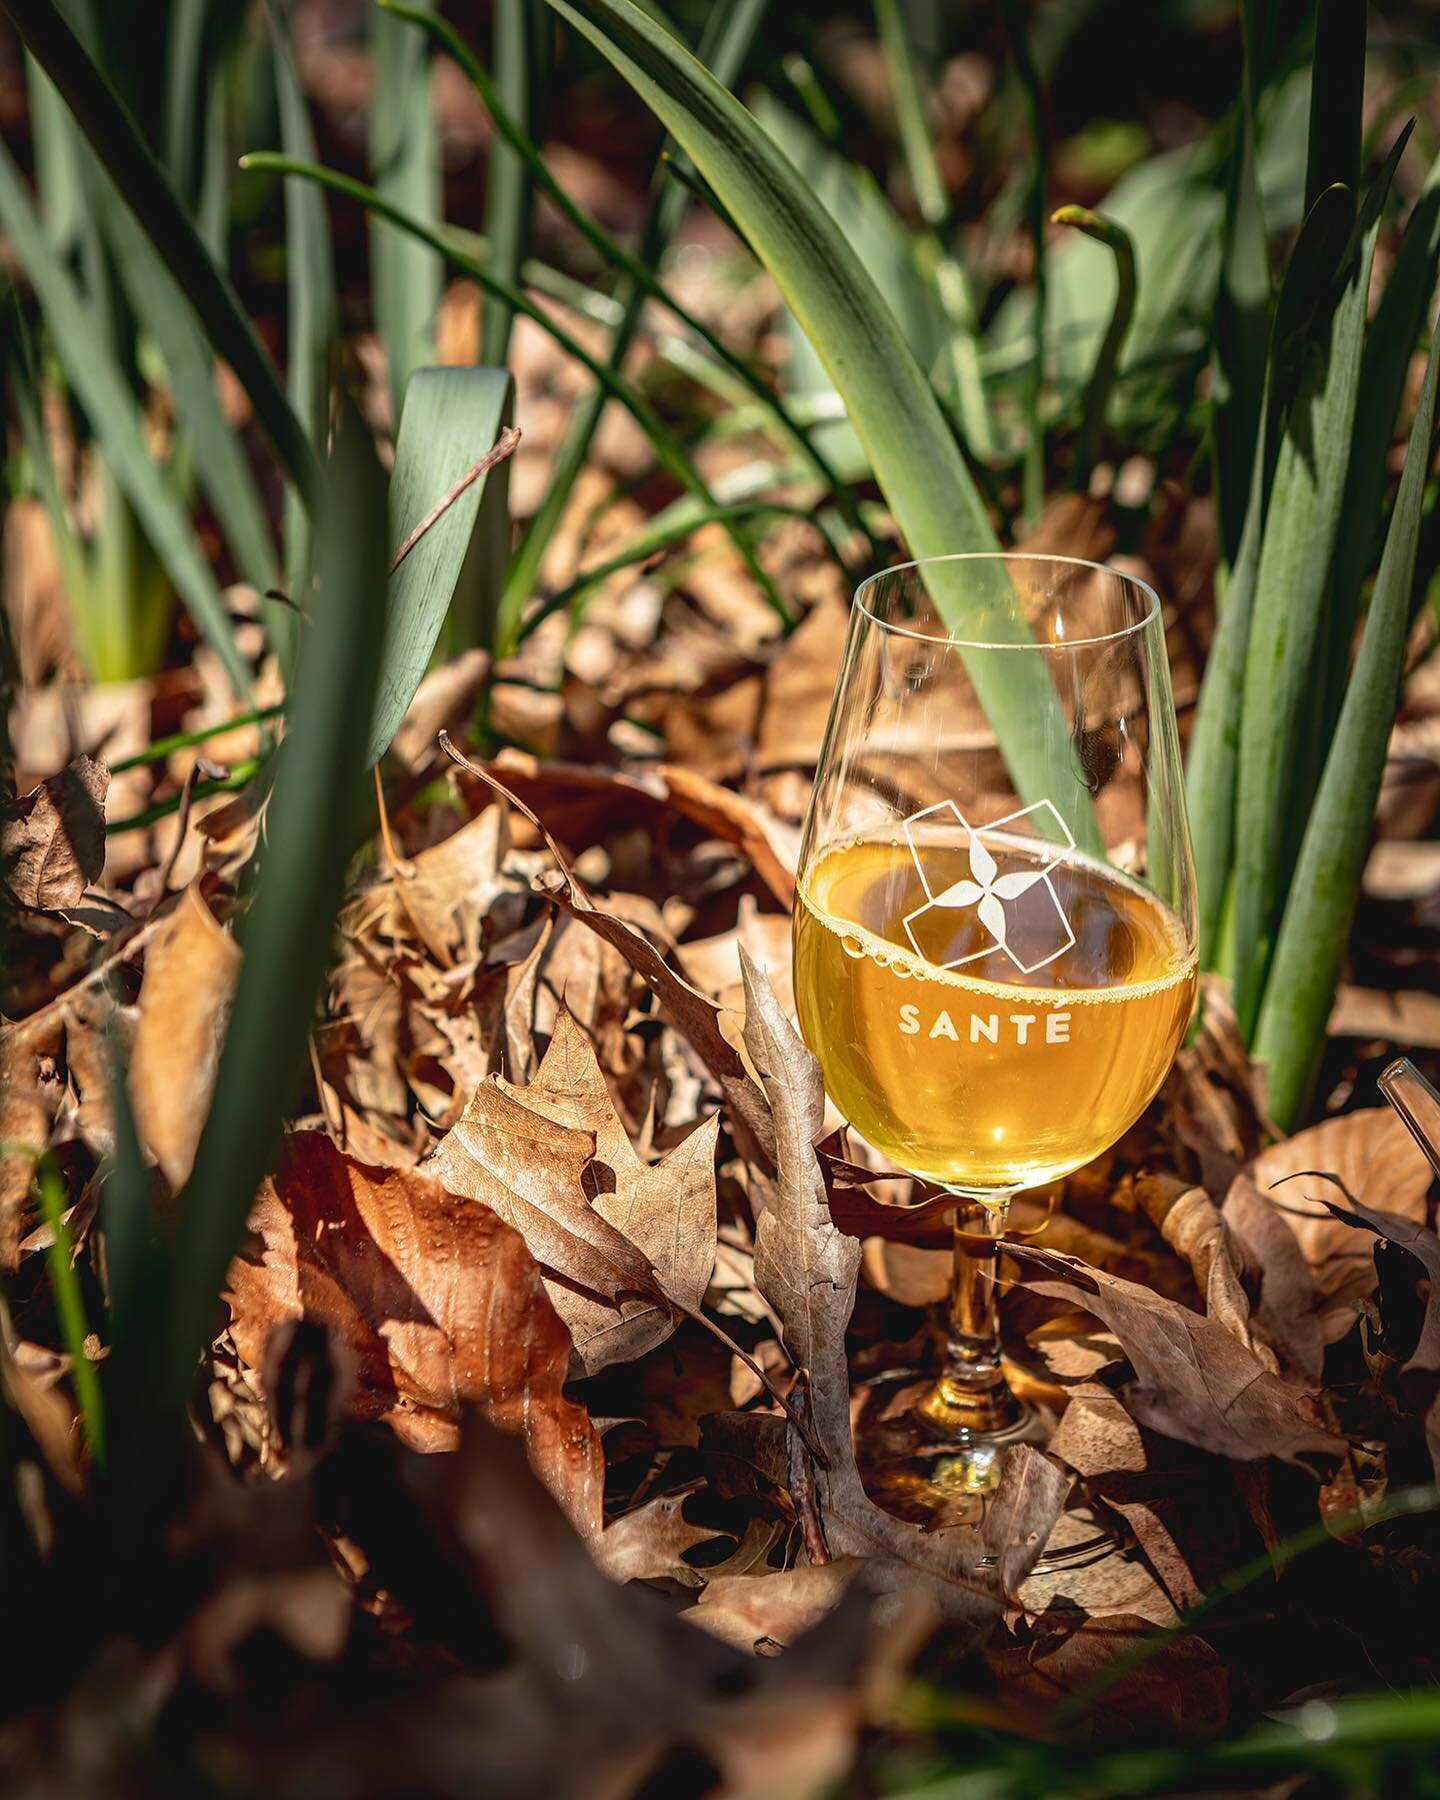 Sant&eacute; glassware just dropped in time for spring
&bull;
4 glasses/$25. Discounts available for industry folk. DM to snag.
Design work done by my good friend @whowhatwolf Beautiful photos from the best there is @jordanaugustphoto 
&bull;
&bull;
